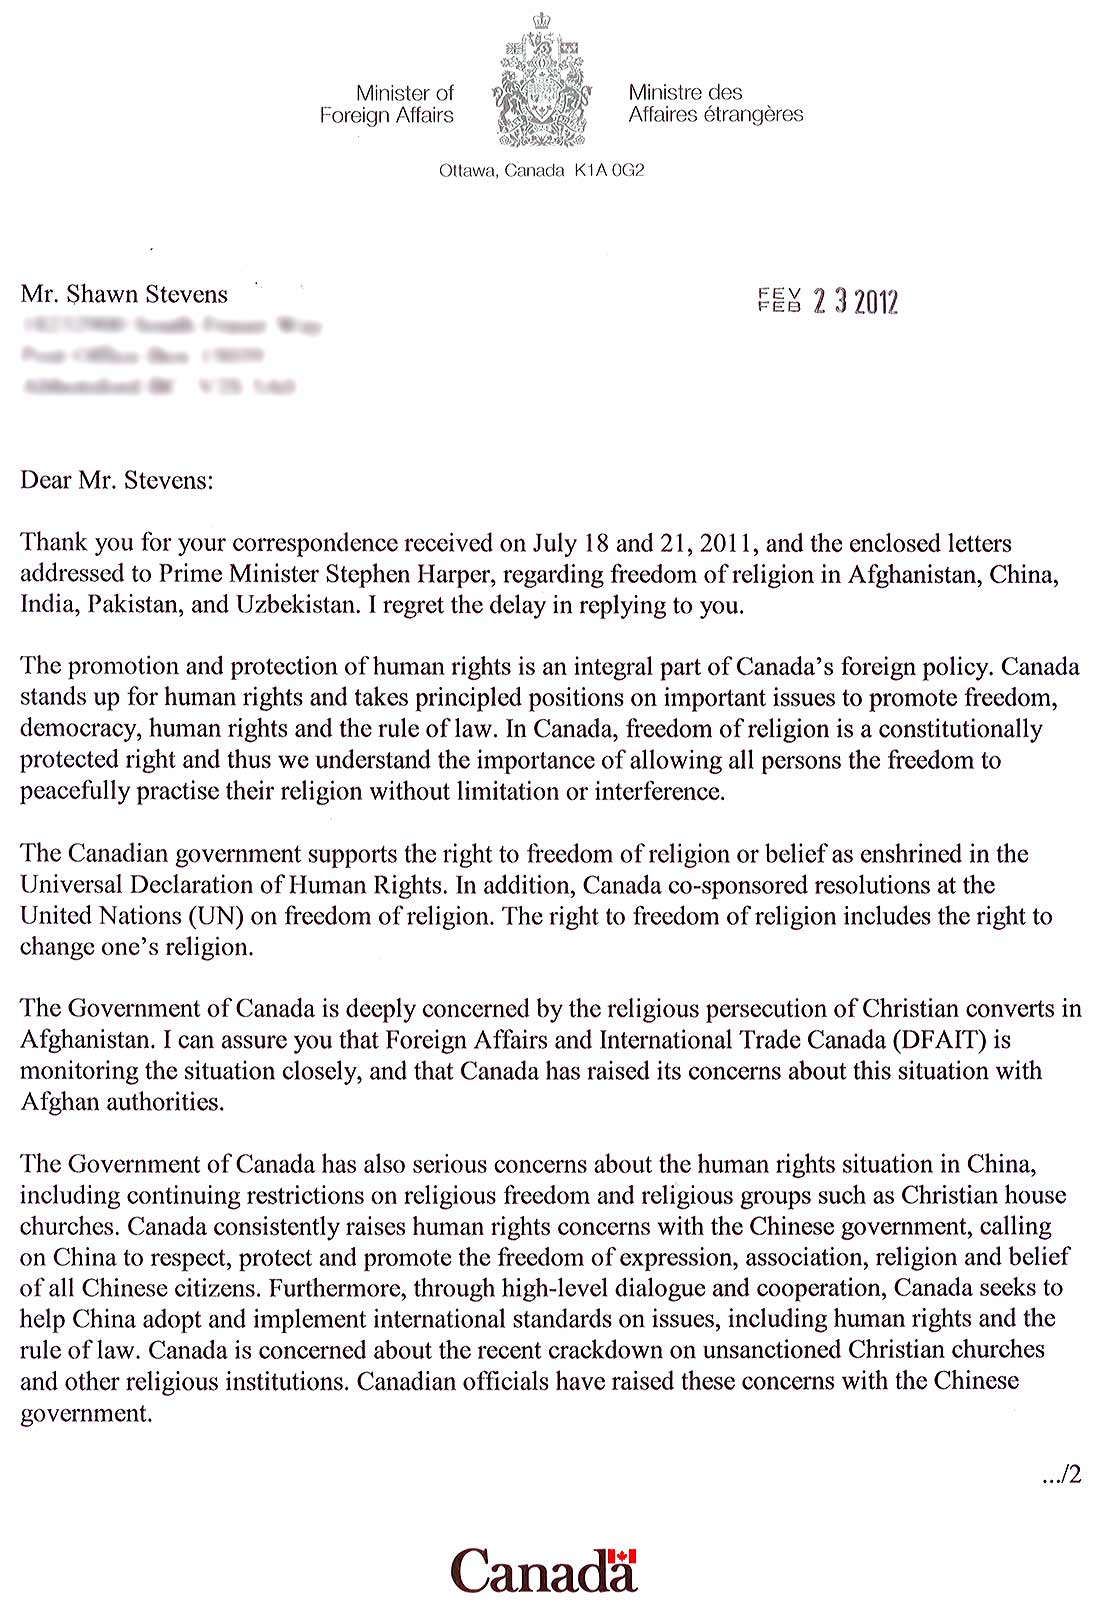 A letter from John Baird, Minister of Foreign Affairs, Canada 